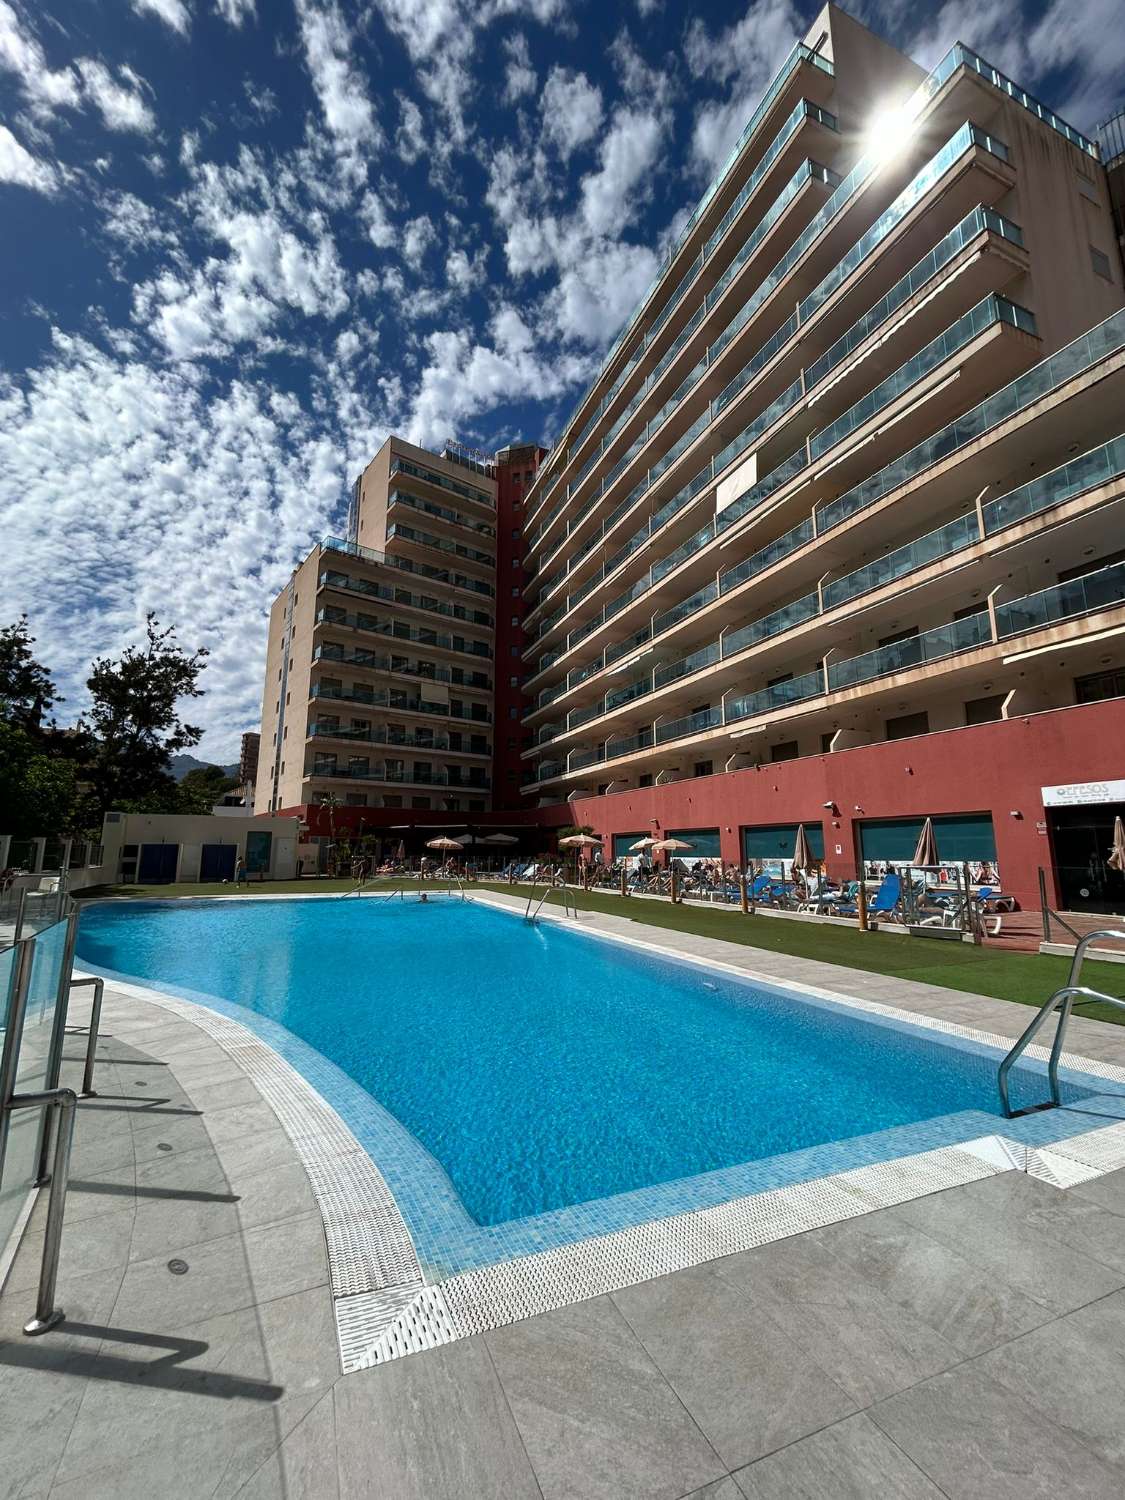 LONG SEASON. NICE APARTMENT FOR RENT 200 METERS FROM THE BEACH IN BENALMADENA